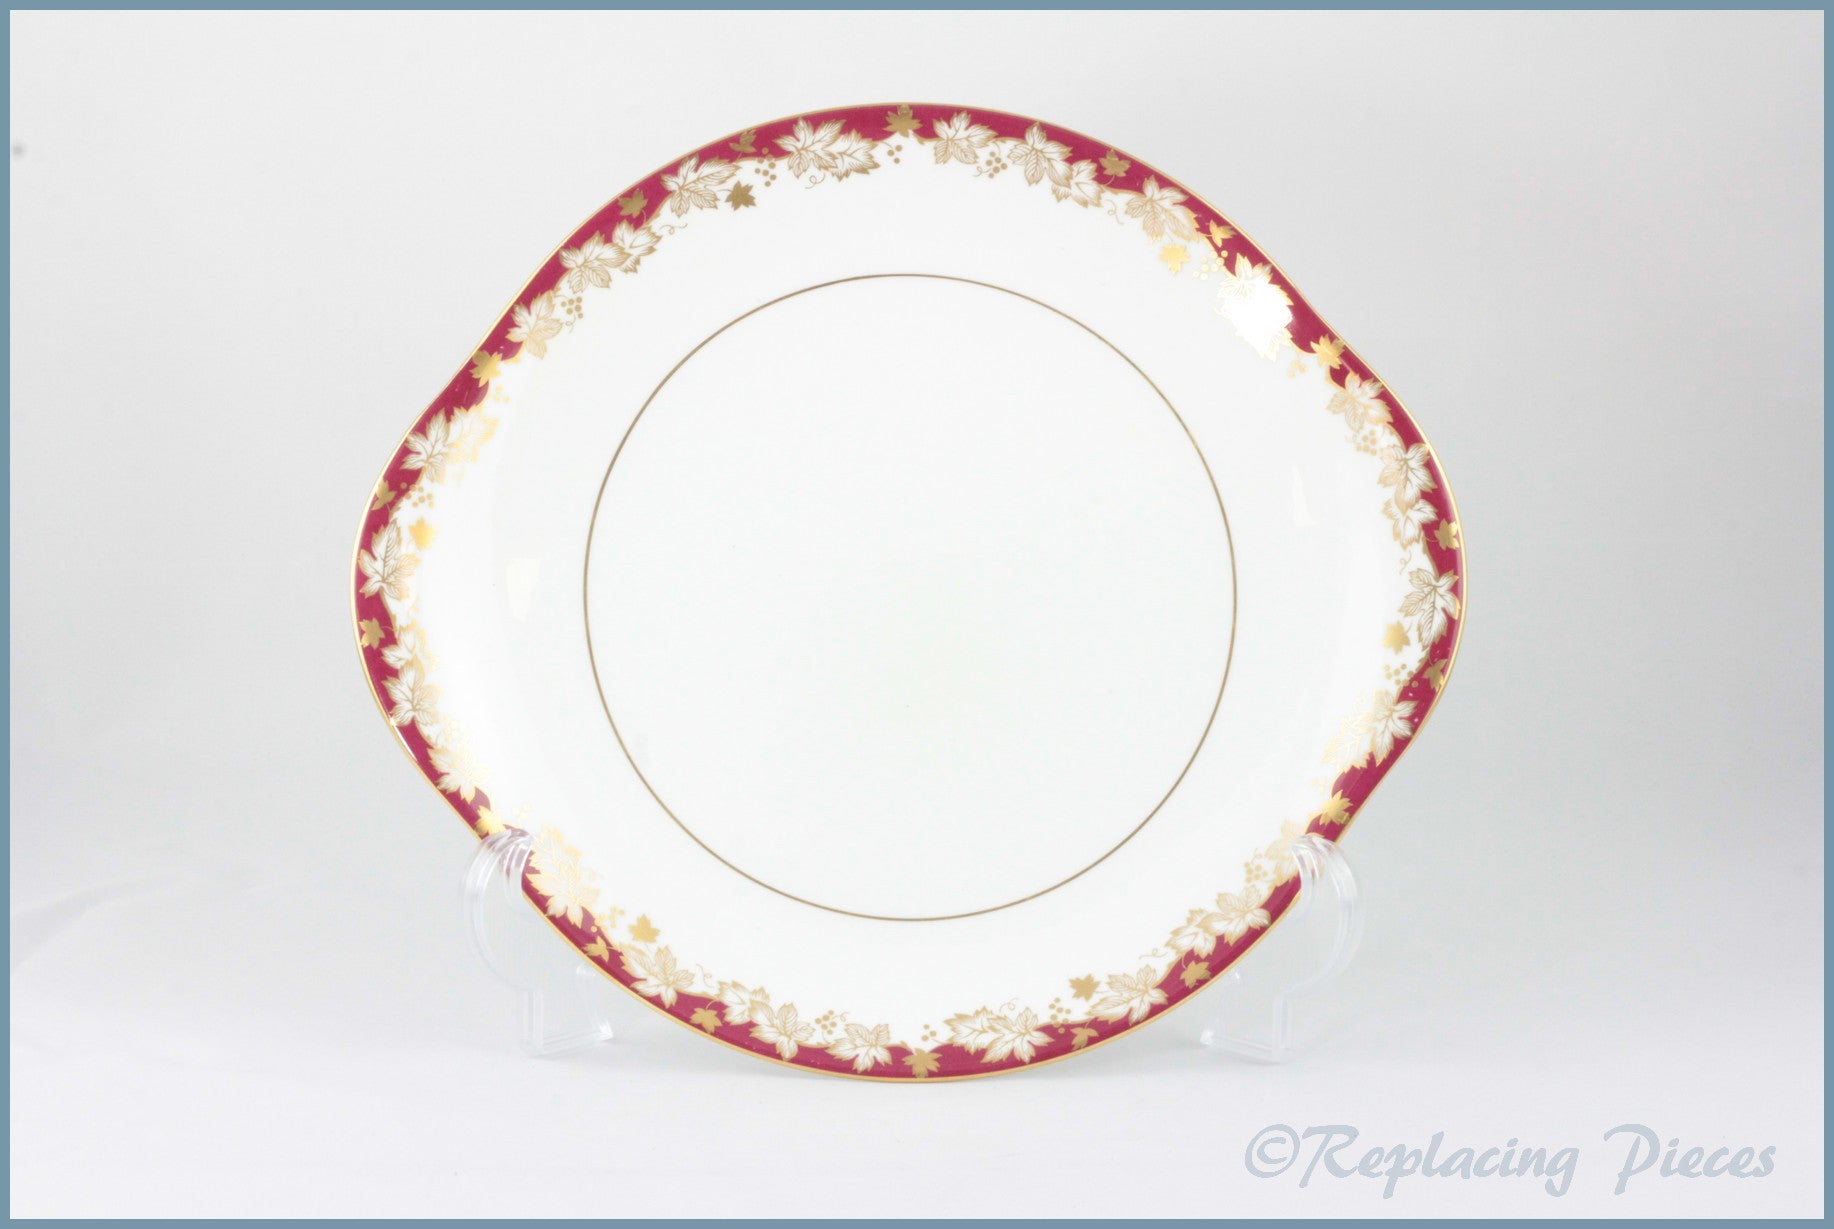 Royal Doulton - Winthrop (H4969) - Bread & Butter Serving Plate